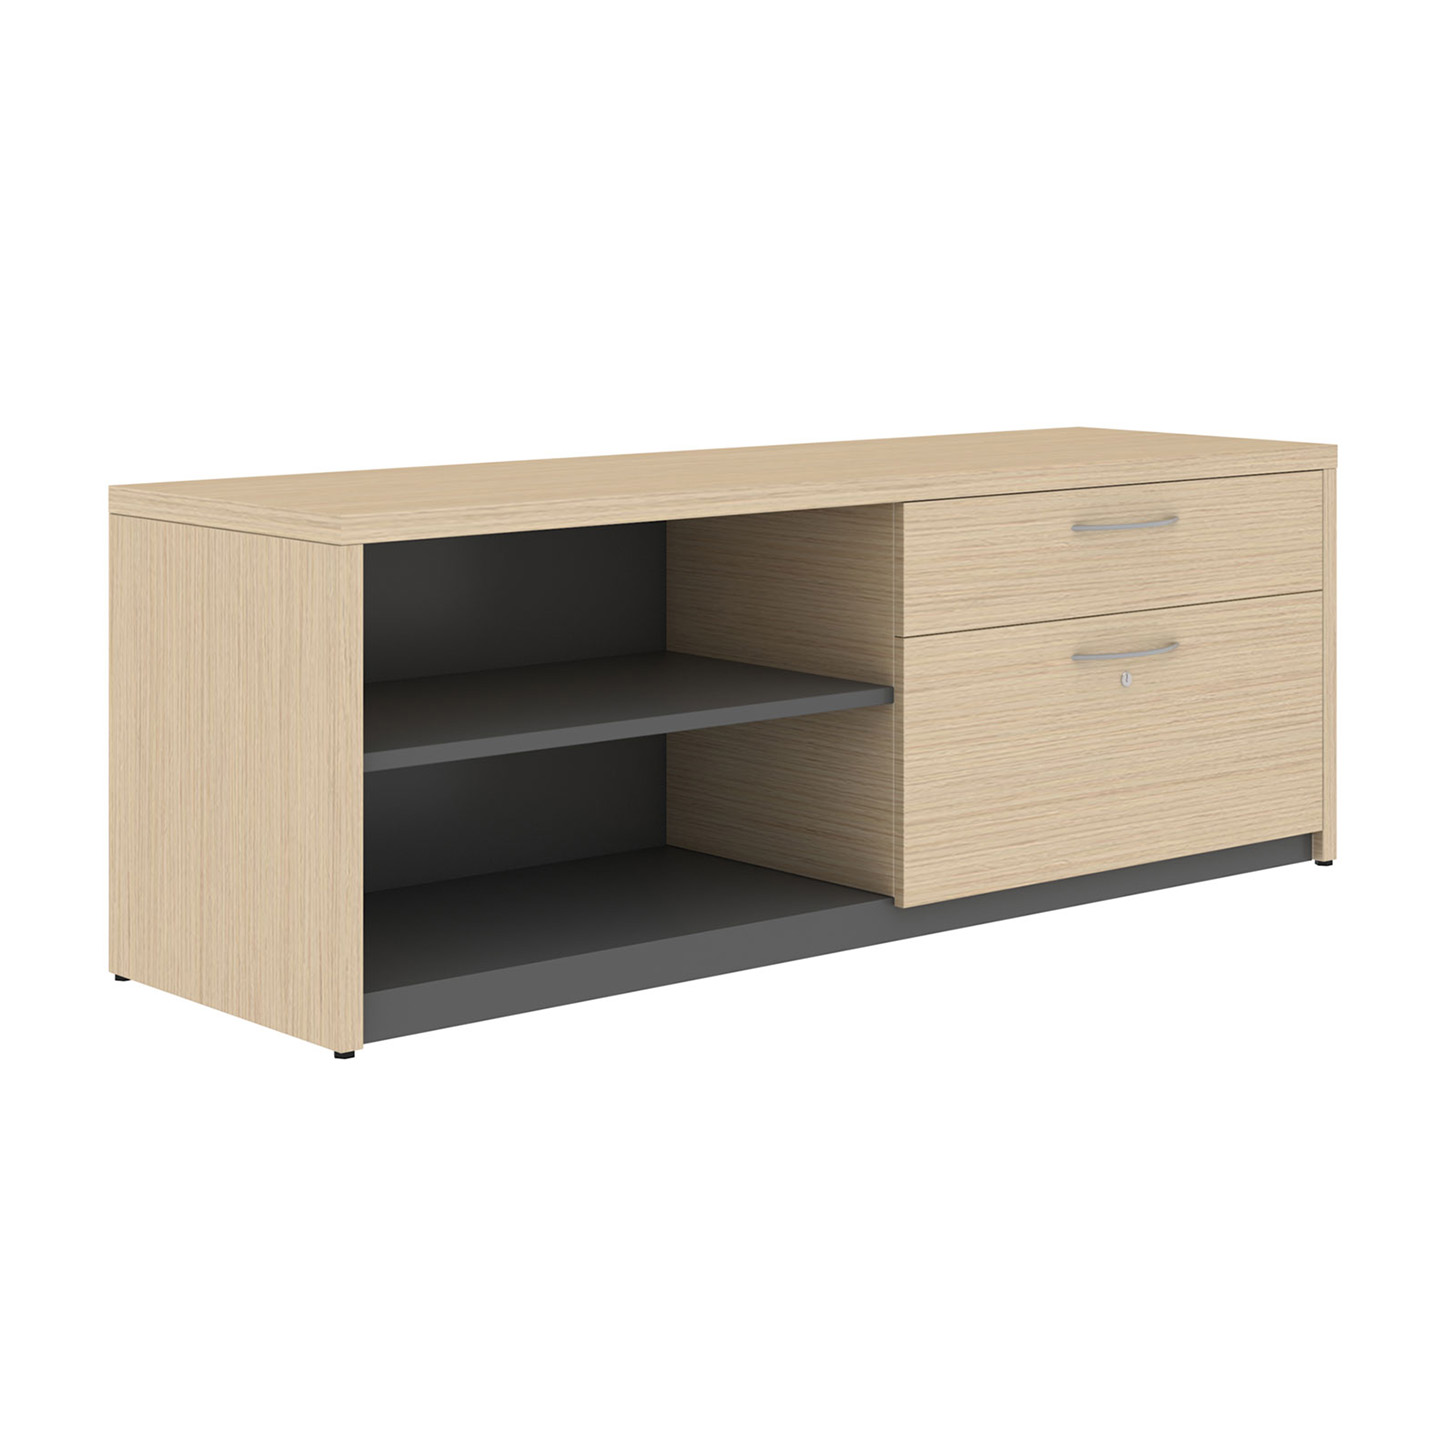 Light wooden A Series credenza with open shelves and box, file drawers with crescent drawer pulls 